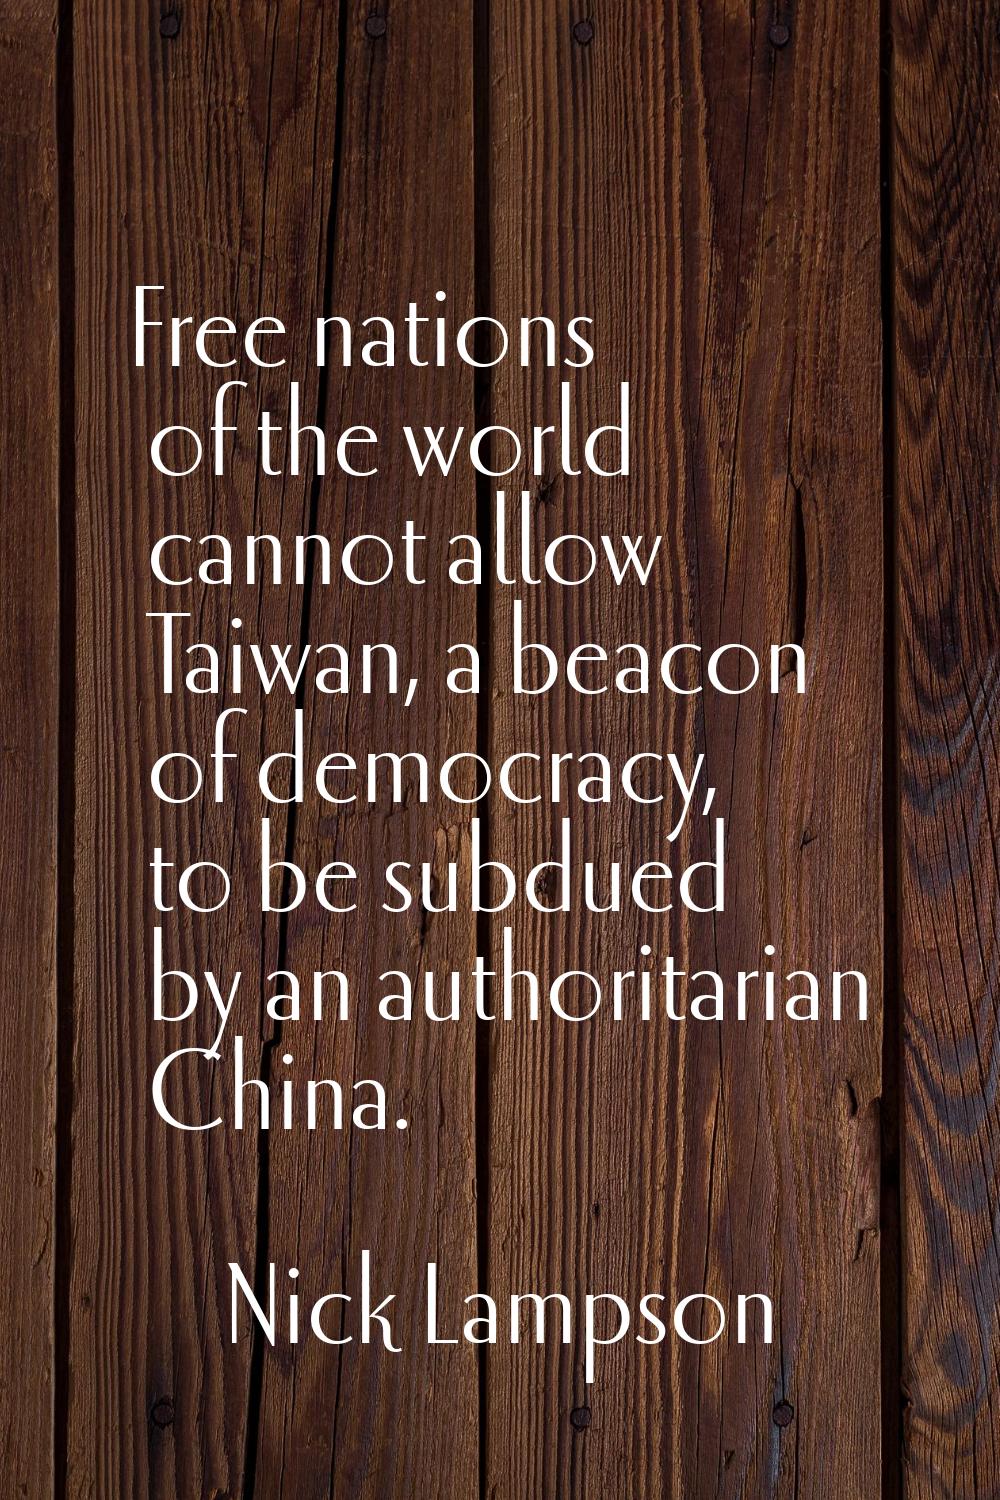 Free nations of the world cannot allow Taiwan, a beacon of democracy, to be subdued by an authorita